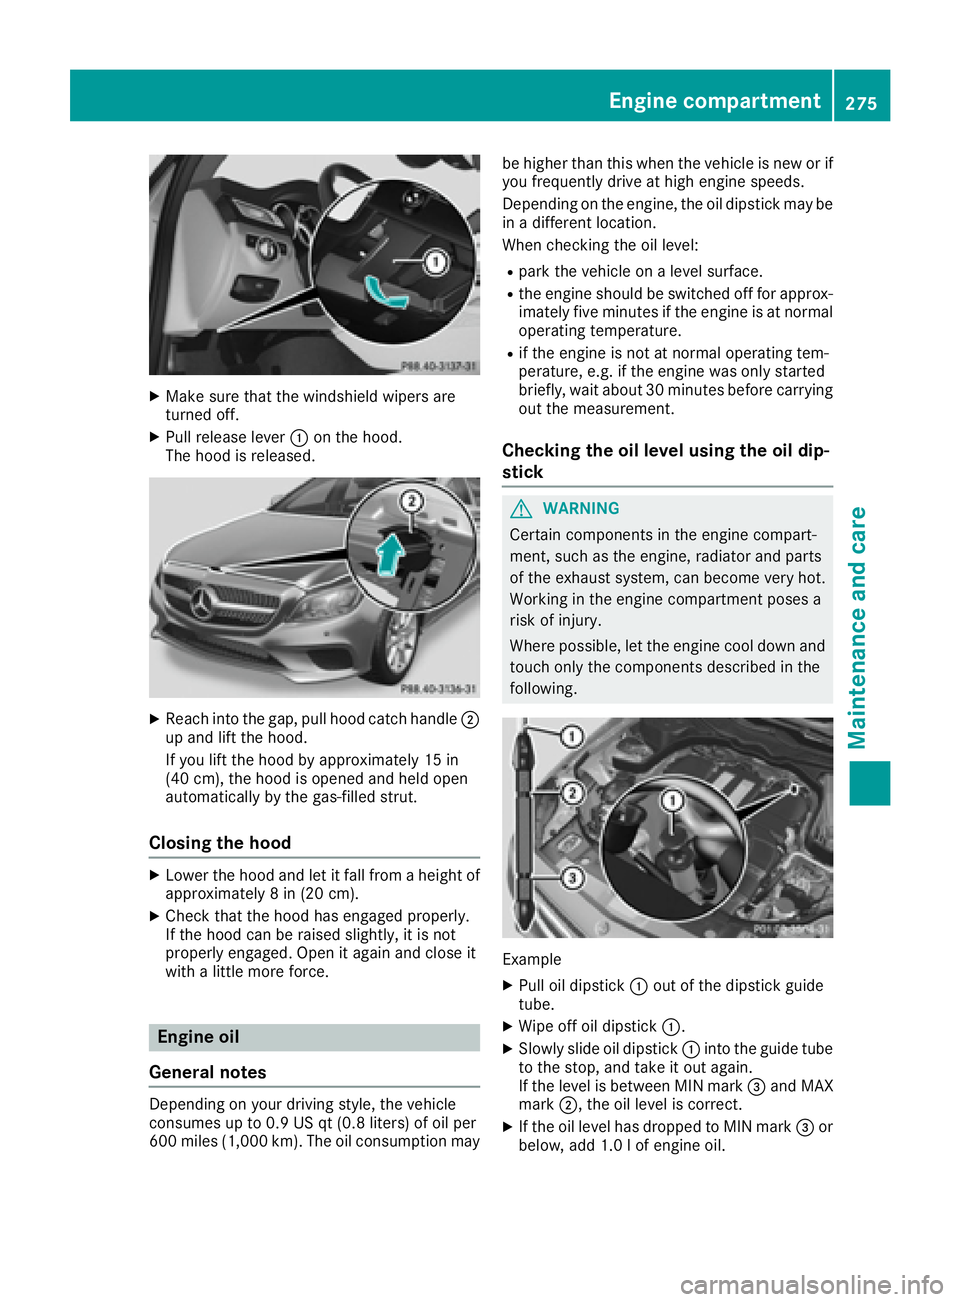 MERCEDES-BENZ CLS 2016  Owners Manual X
Make sure that the windshield wipers are
turned off. X
Pull release lever �C on the hood.
The hood is released.
X
Reach into the gap, pull hood catch handle �D
up and lift the hood.
If you lift the 